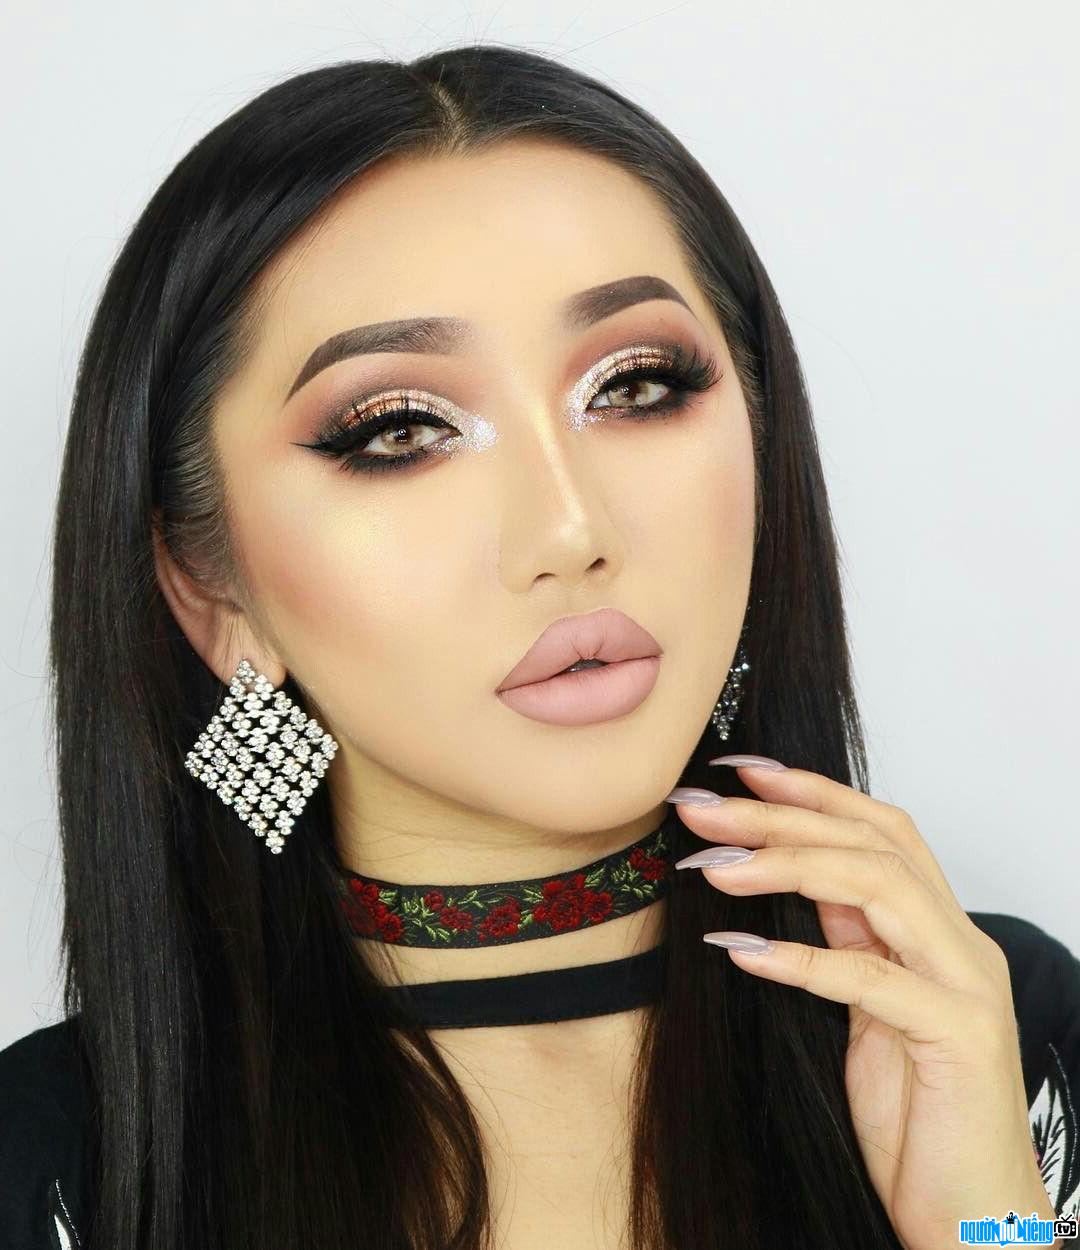 New pictures of Beauty Blogger Xthuyle